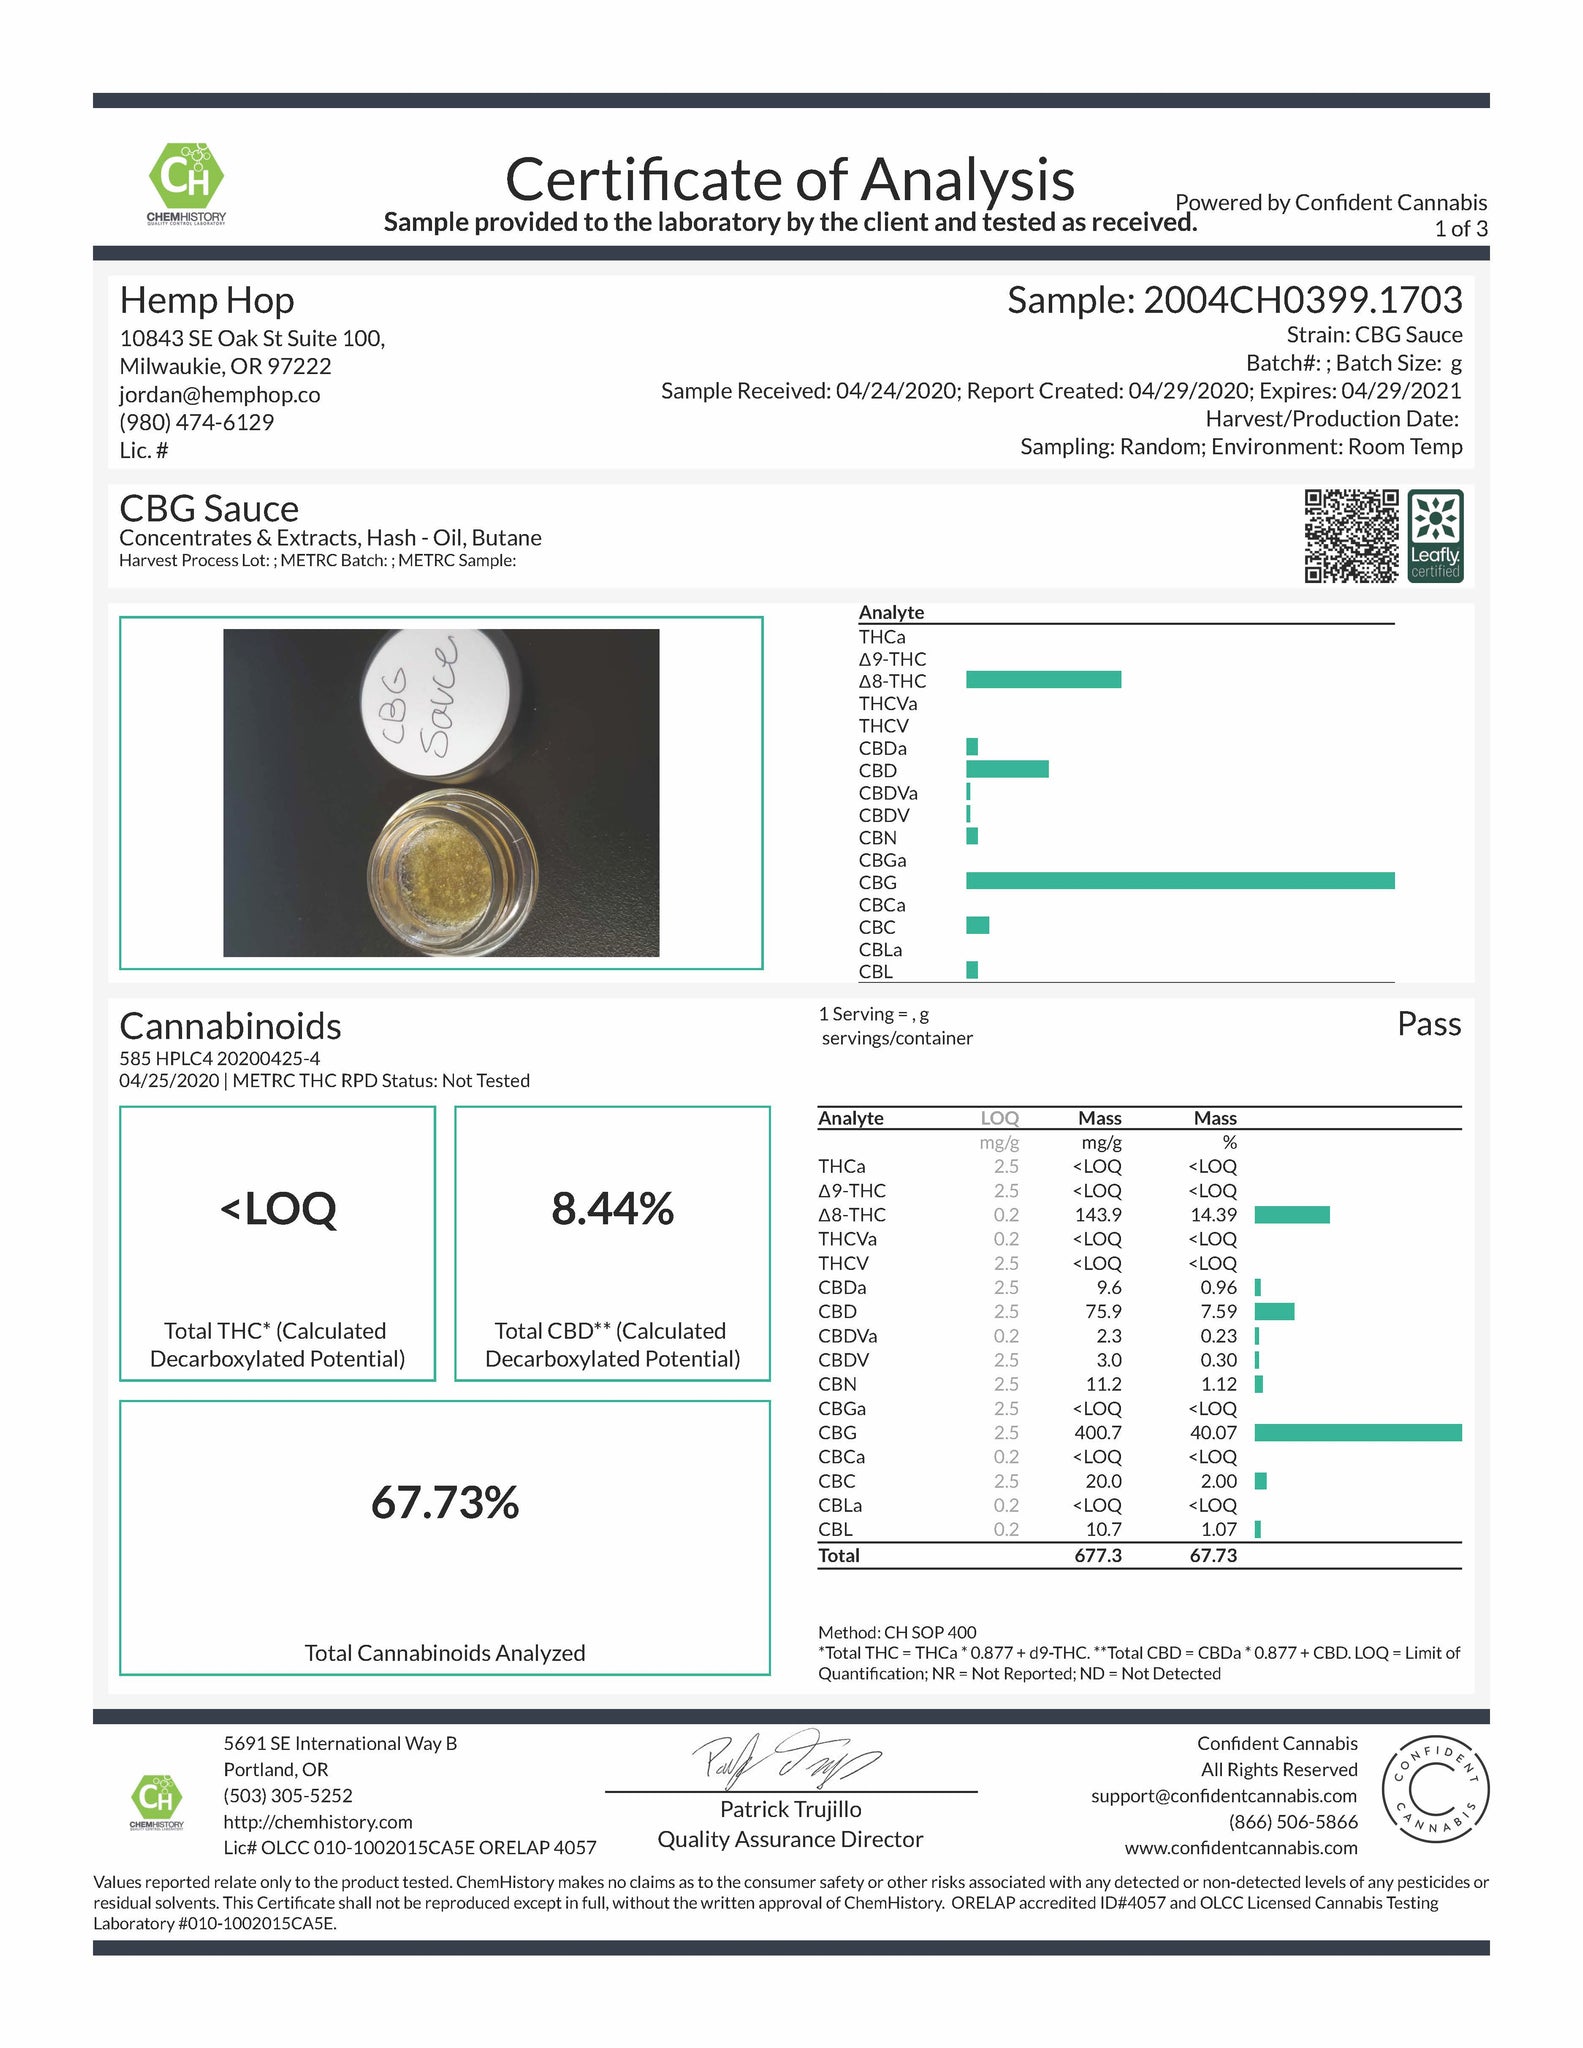 cbg sauce full spectrum concentrate Lab Results 